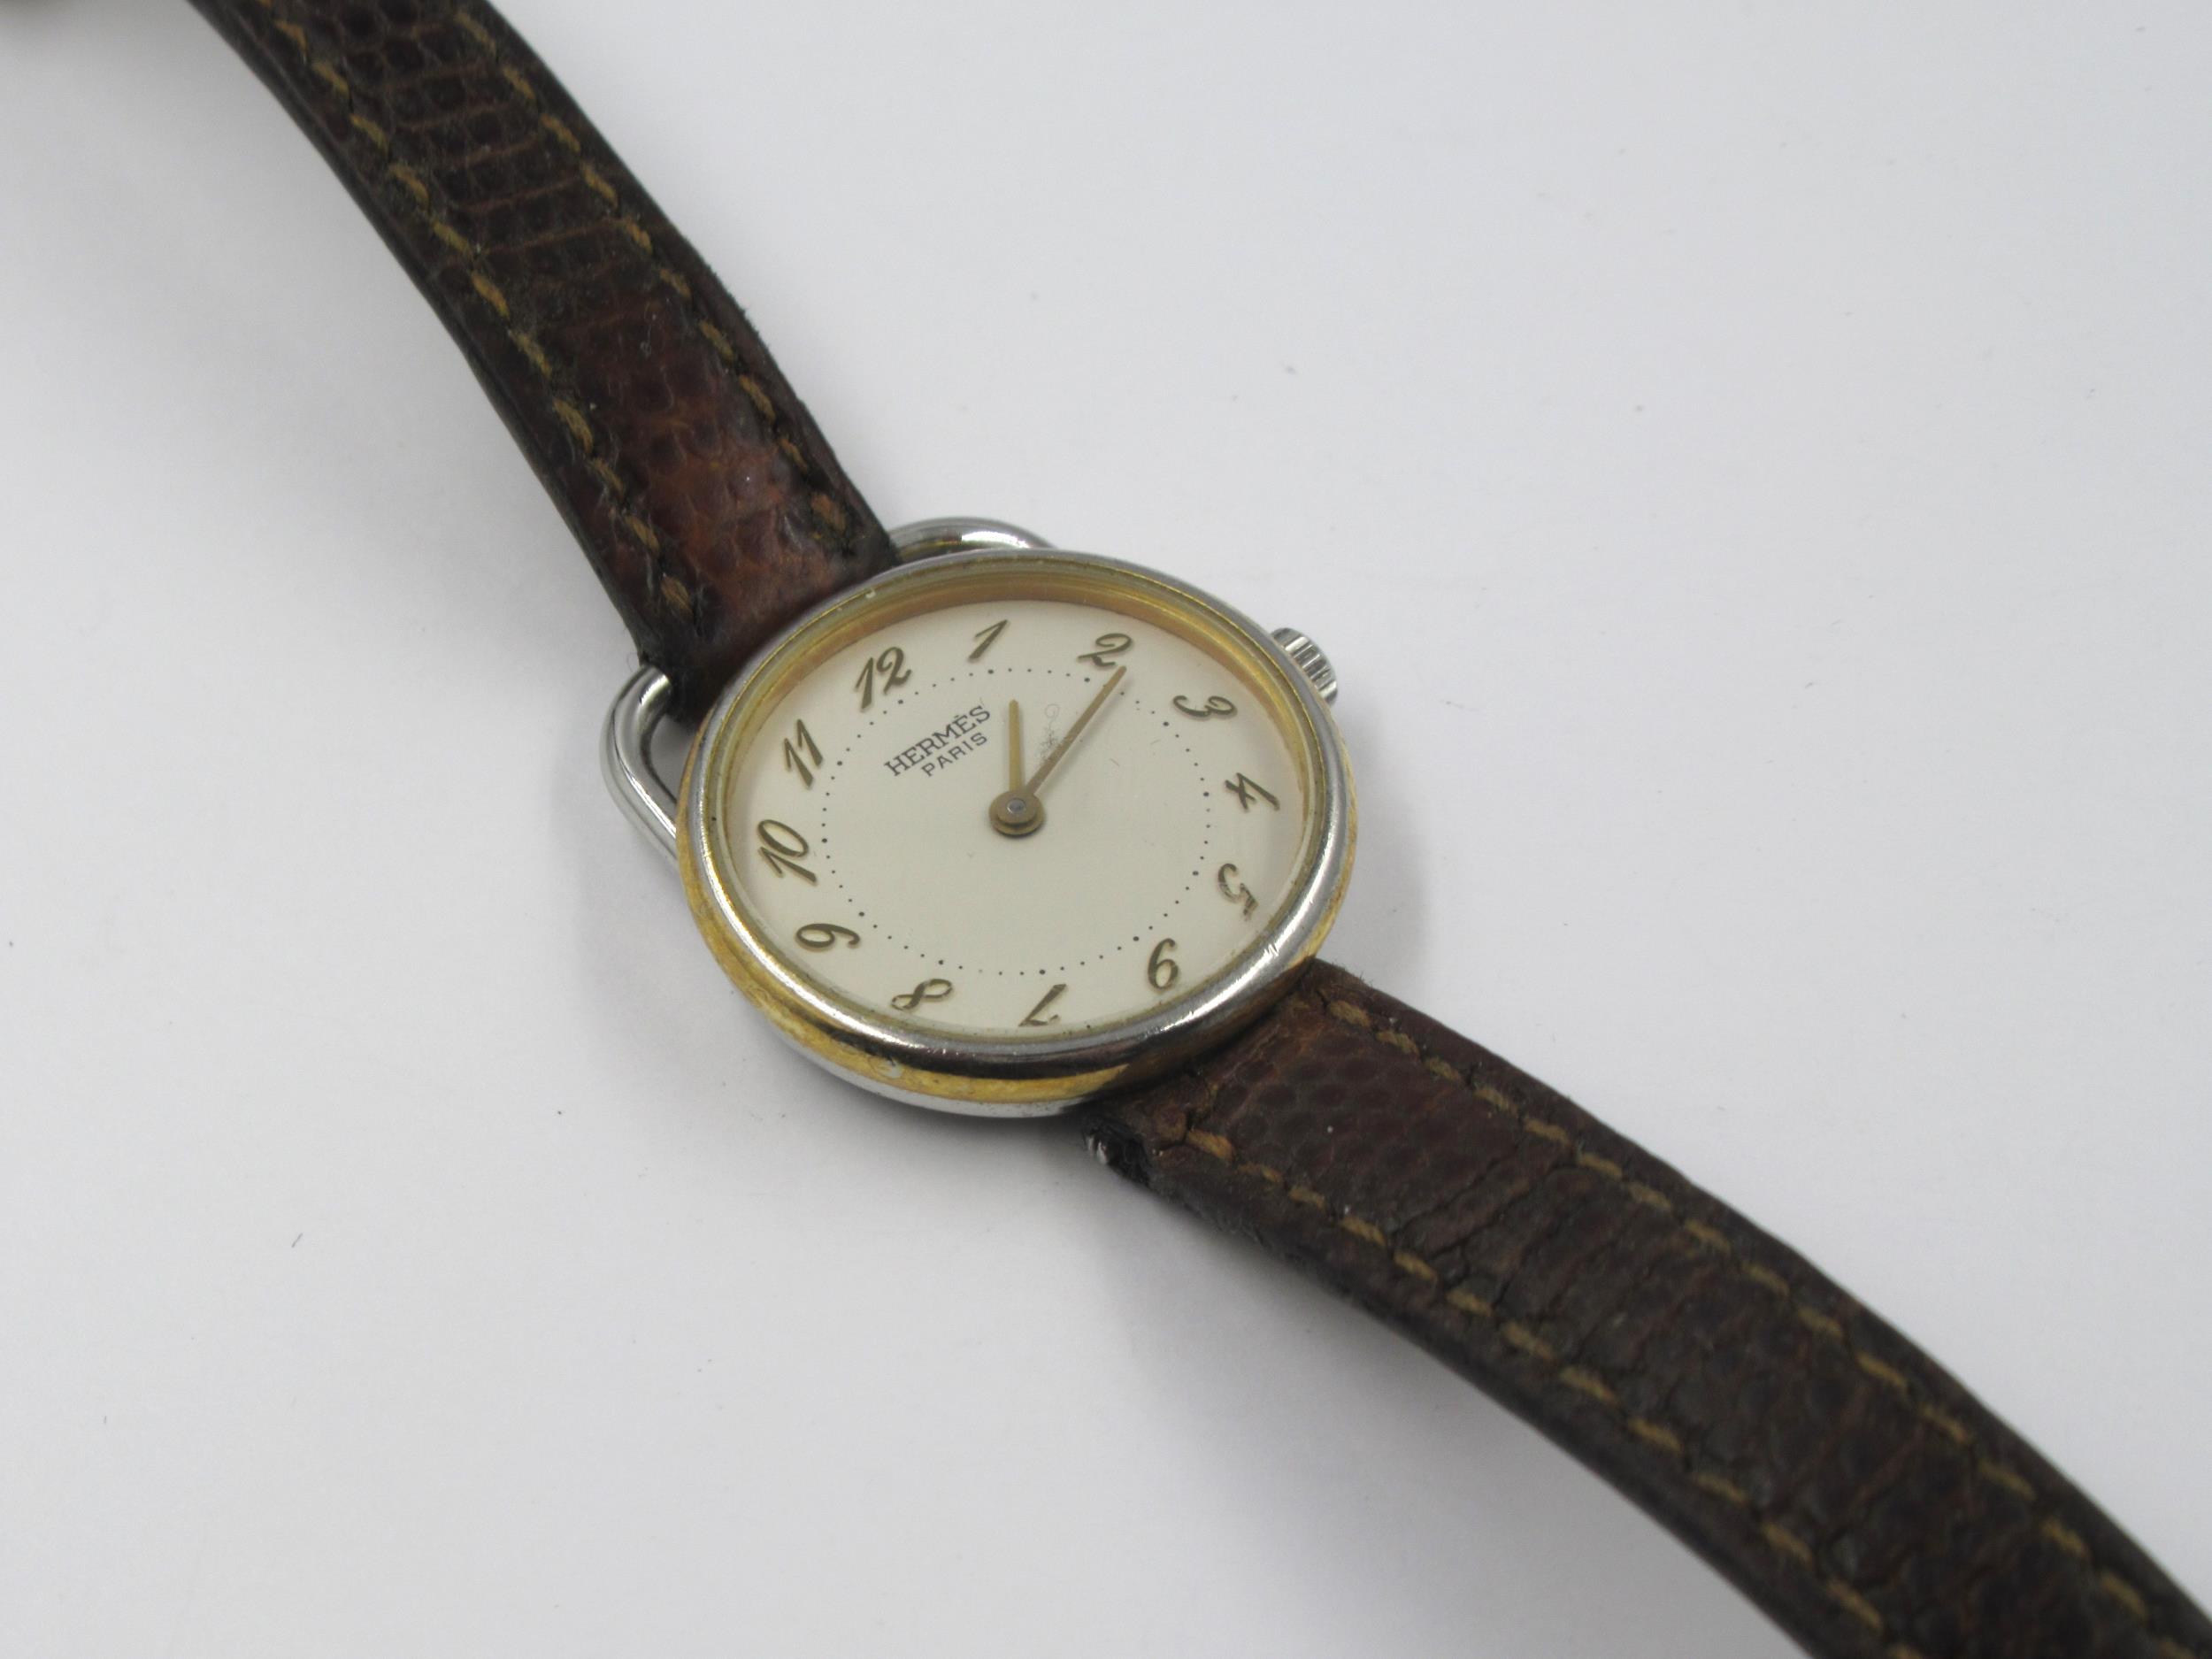 Hermes, ladies circular wristwatch with a brown leather strap, in a Hermes box - Image 2 of 2